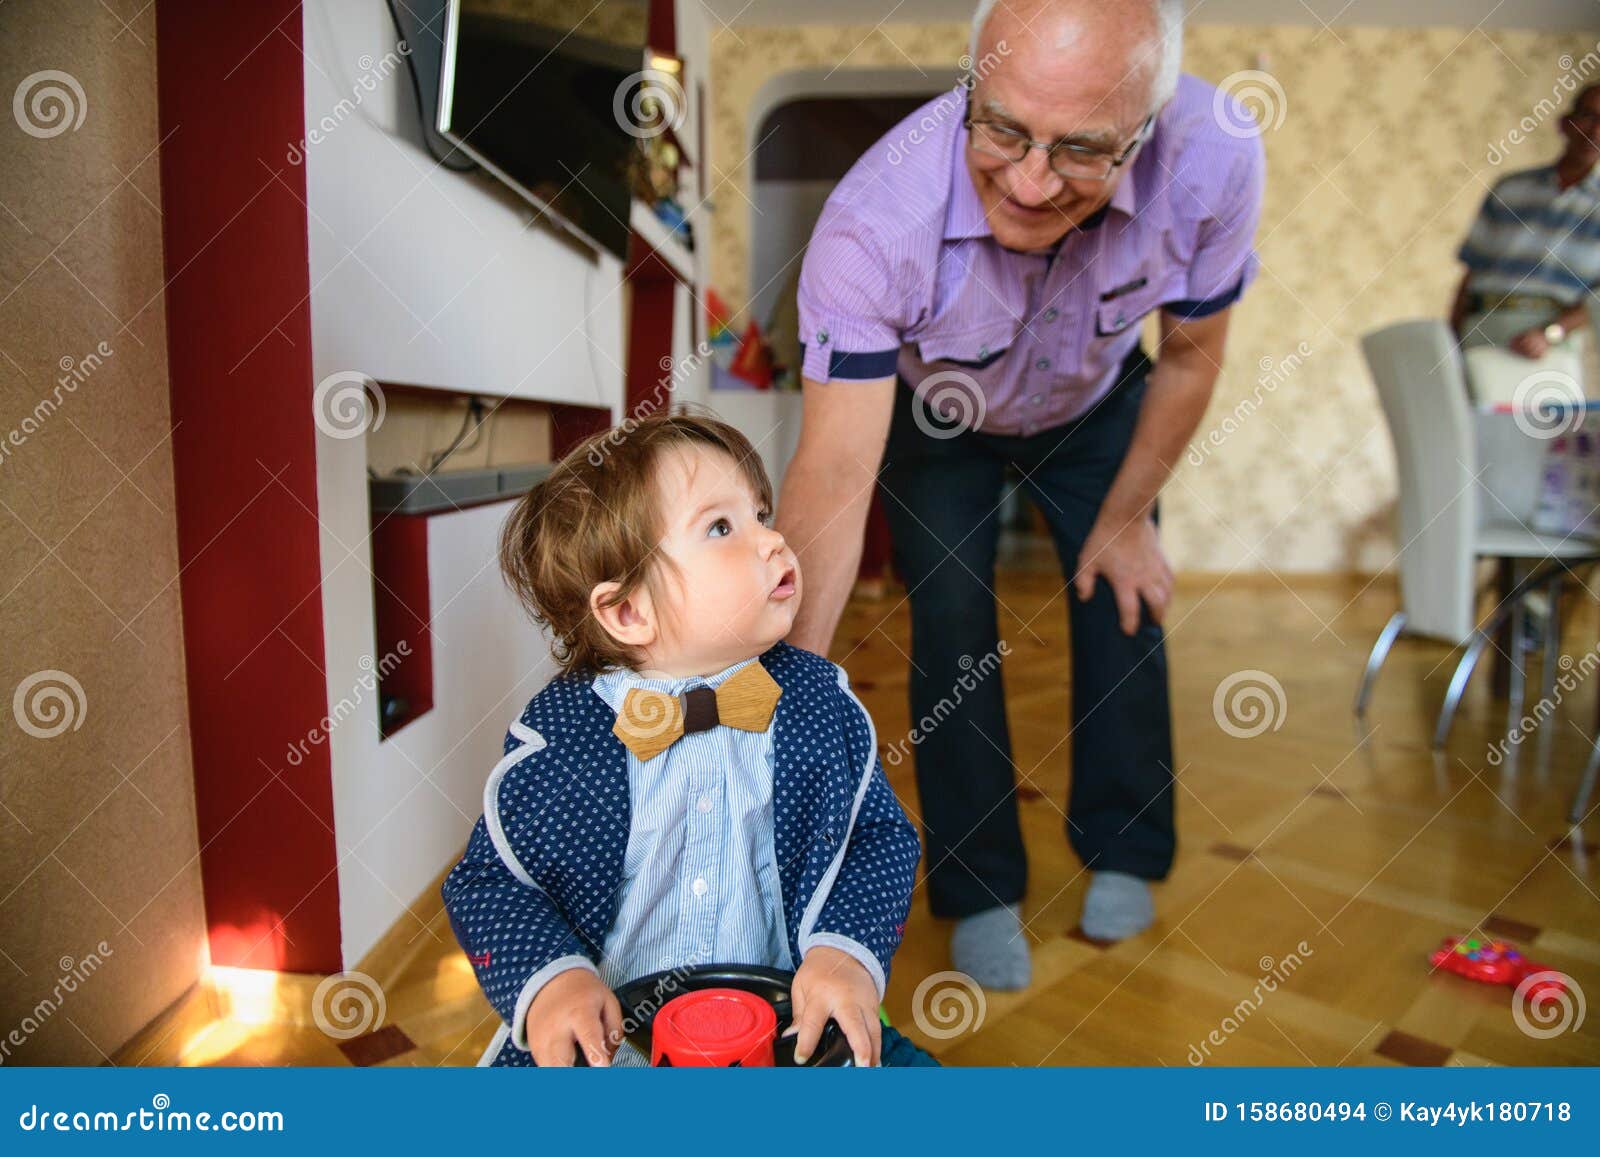 grandfather rolls grandson in a toy car. redirection of grandfather and grandson. happy weekend concept. happy grandfather and